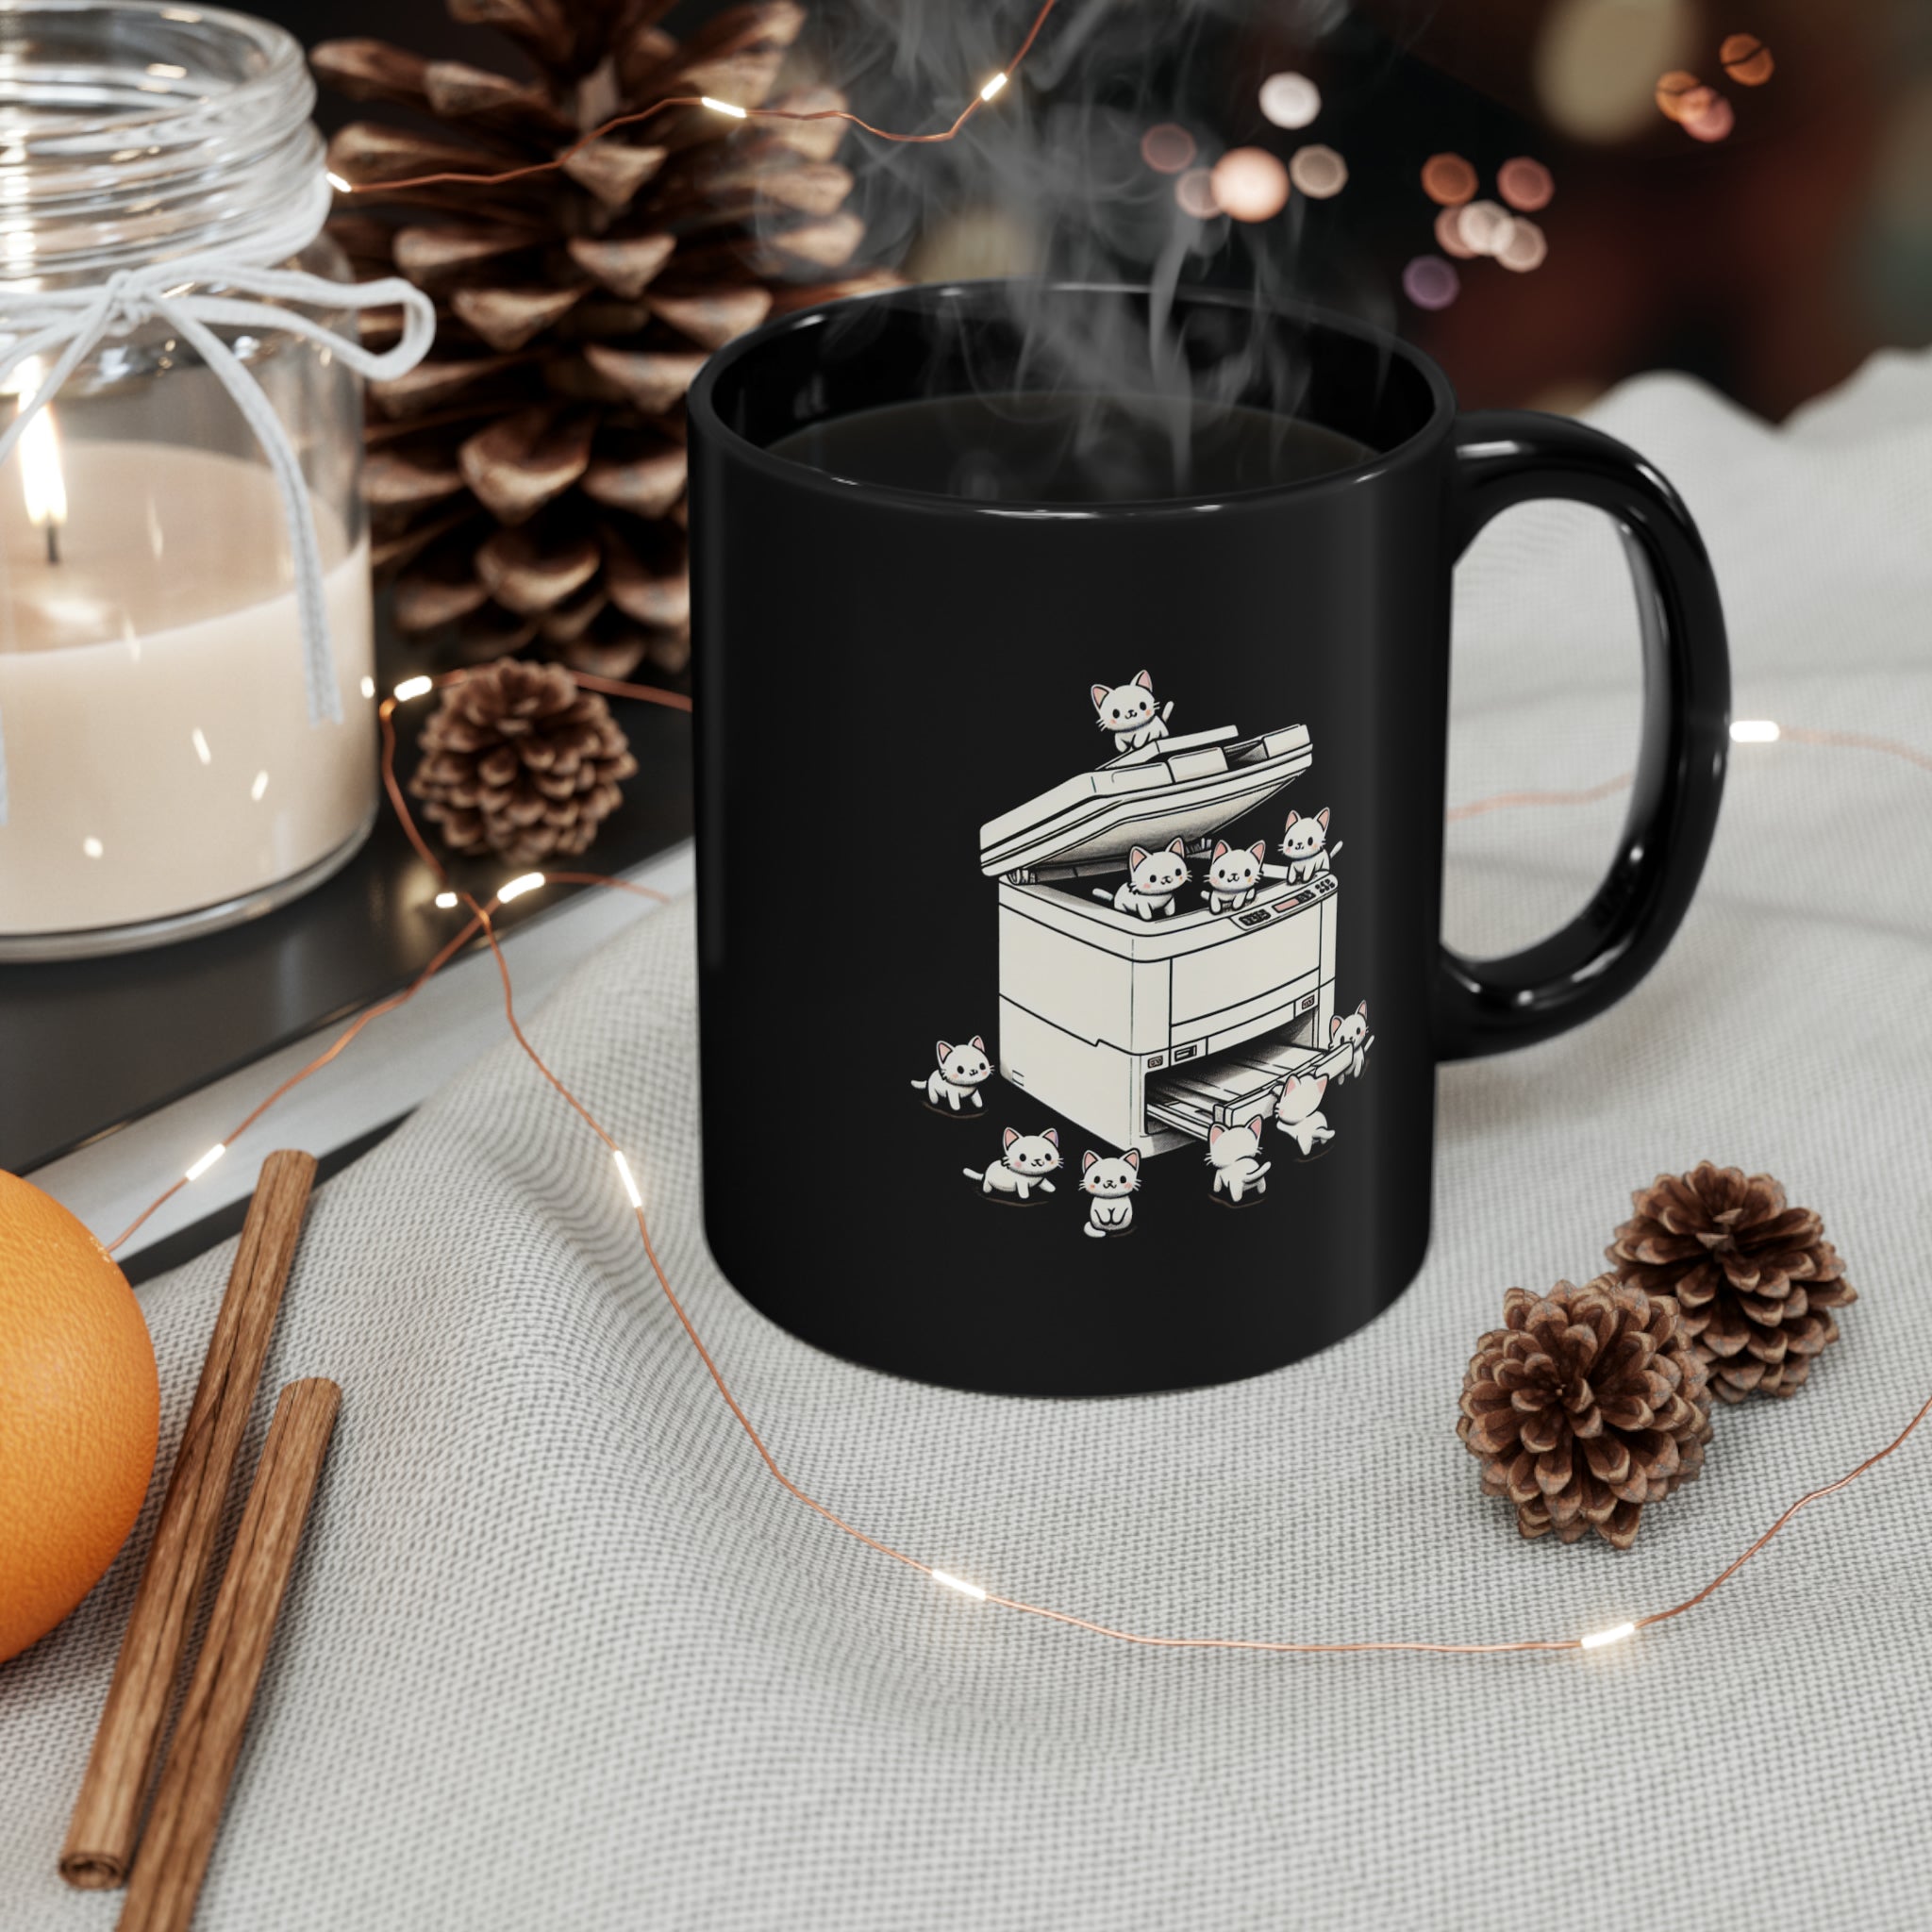 Copy Cats Black Mug (11oz, 15oz) Cute Cats Photocopier Gift For Him Gift For Her Birthday Christmas Valentine Cup Adorable Puns